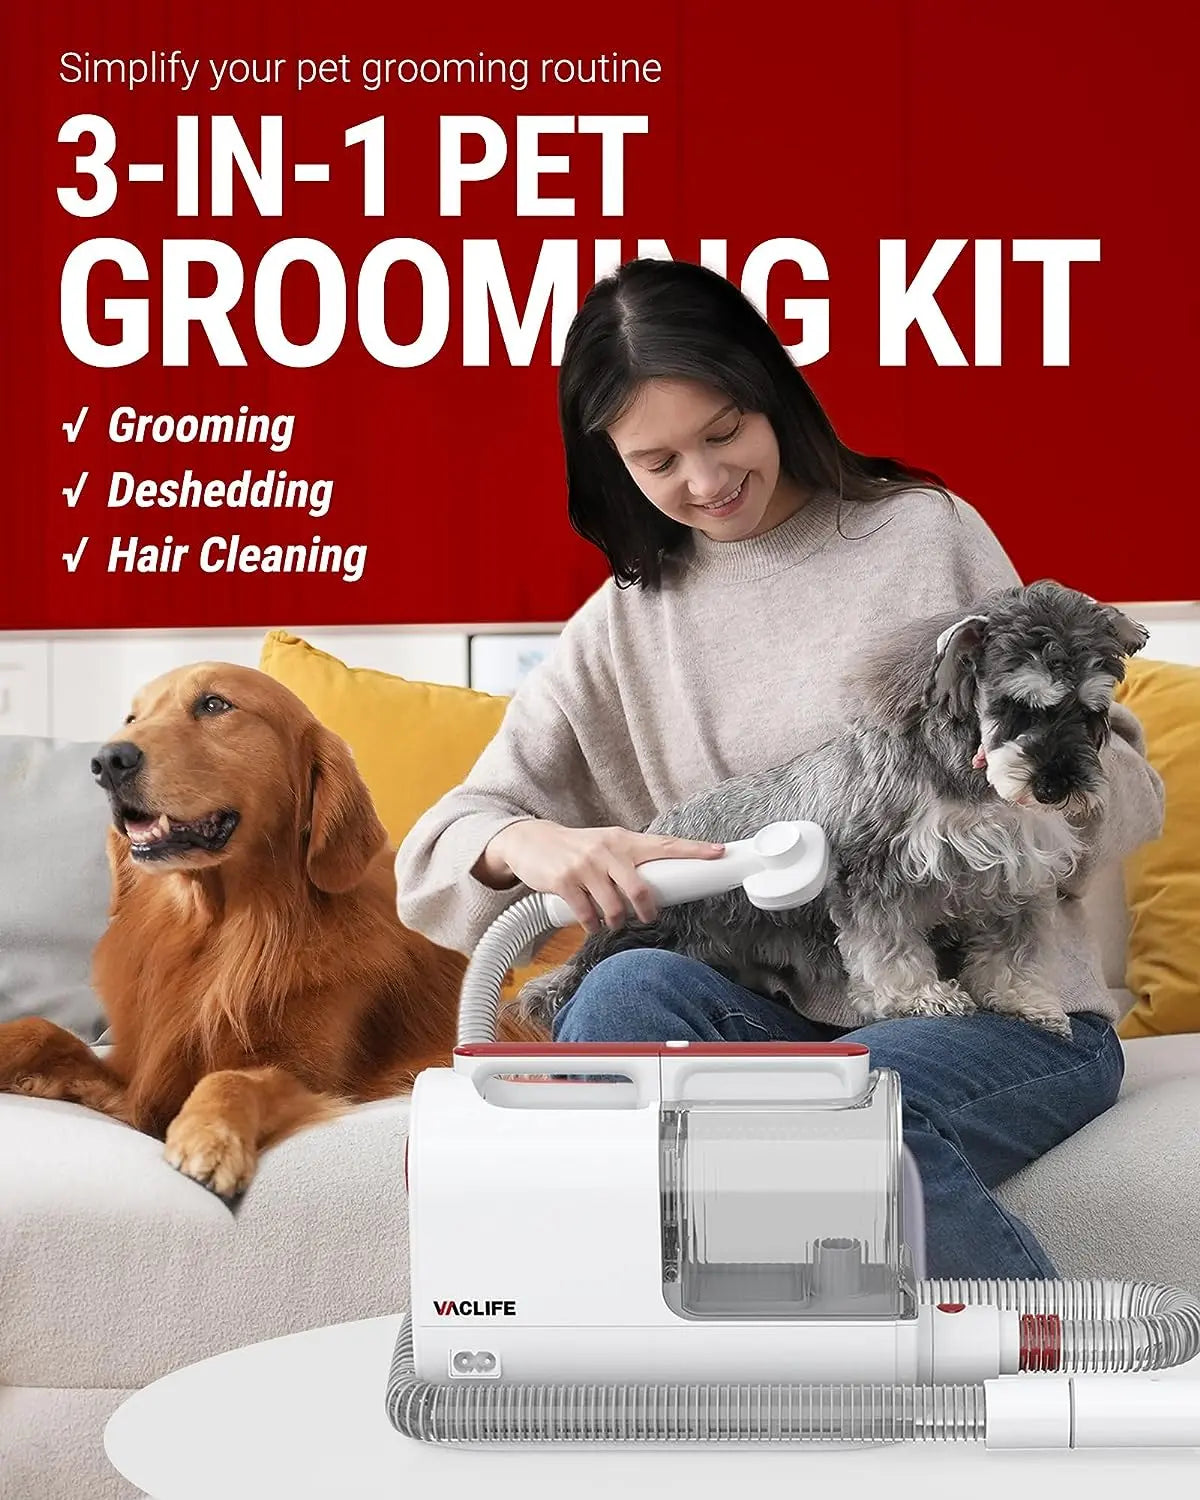 VacLife Pet Hair Vacuum For Shedding Grooming With Dog Clipper - Multipurpose Dog Grooming Kit With Brushes And Other Grooming Tools For Dogs And Cats - Low-Noise - White And Red - Image #2